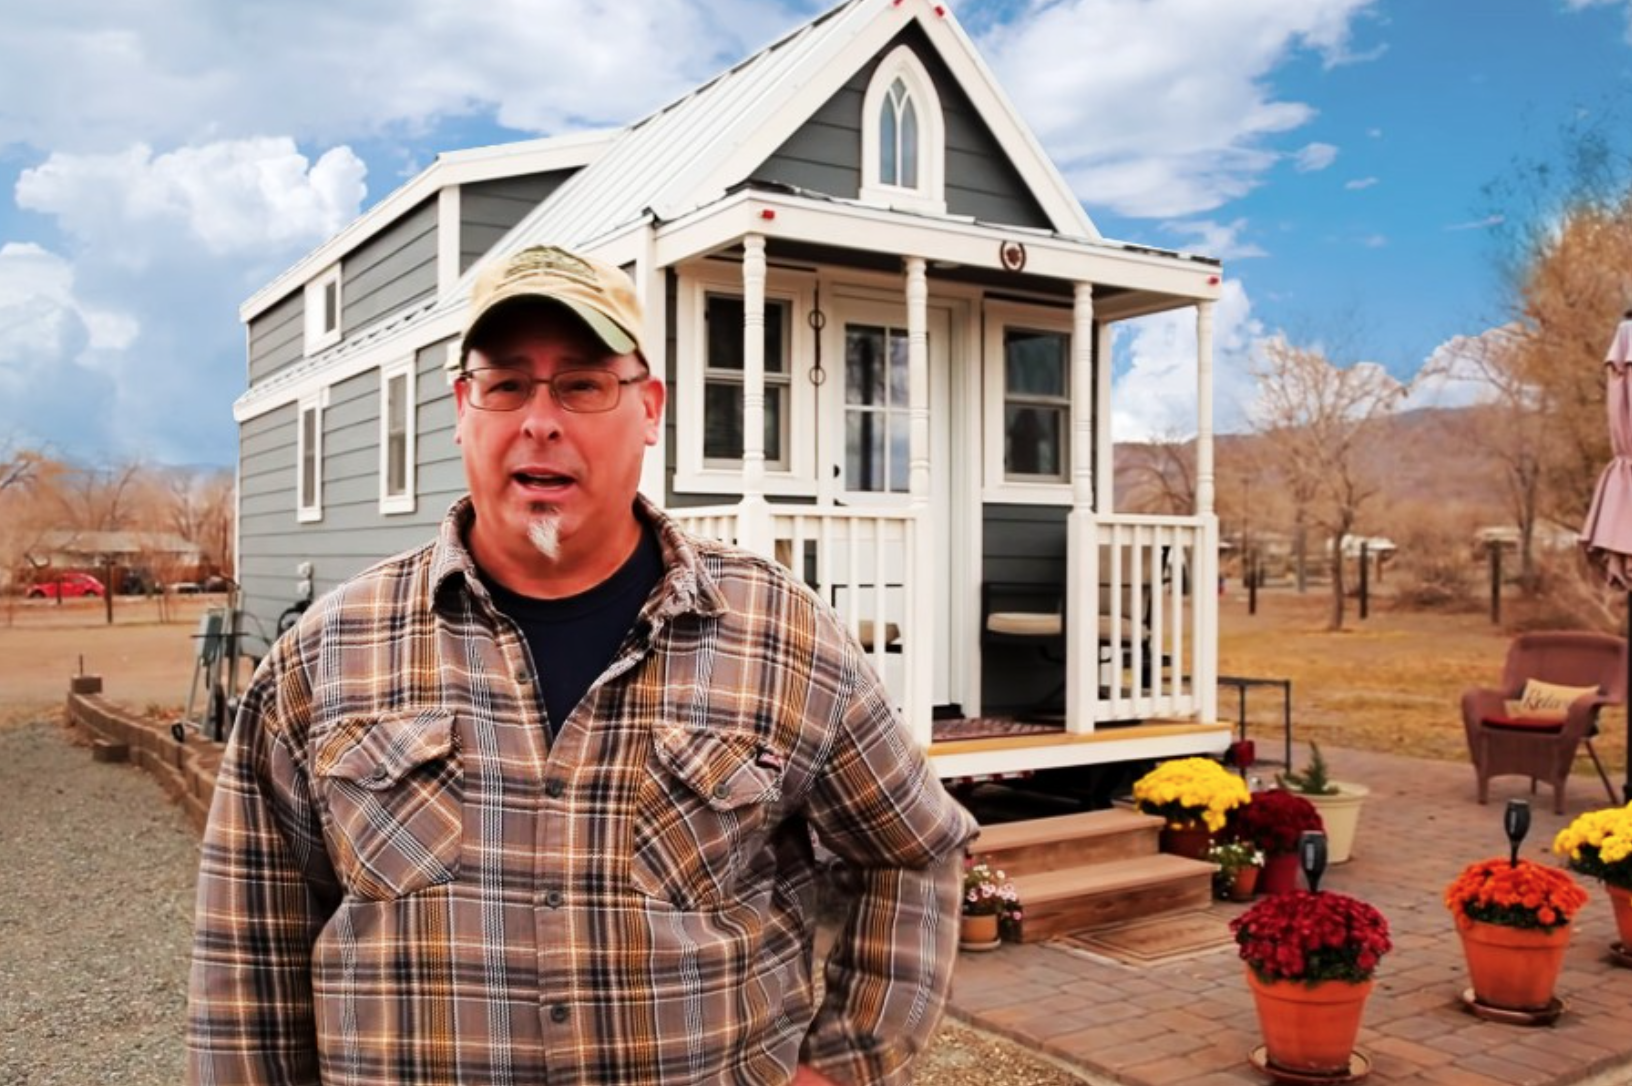 Owner with his tiny house